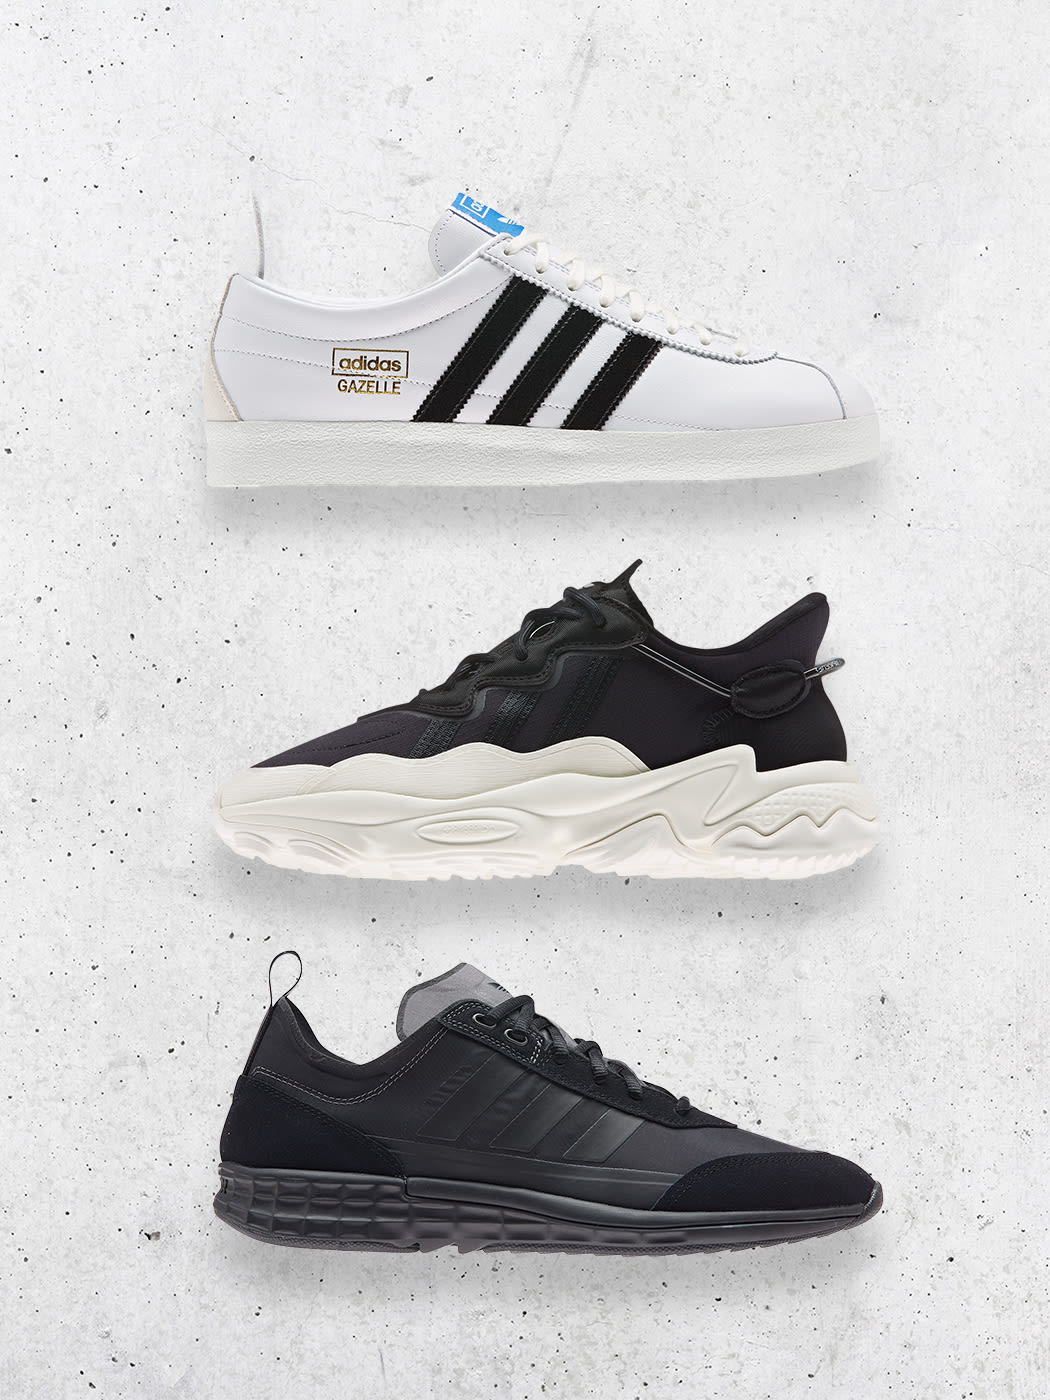 adidas germany official website